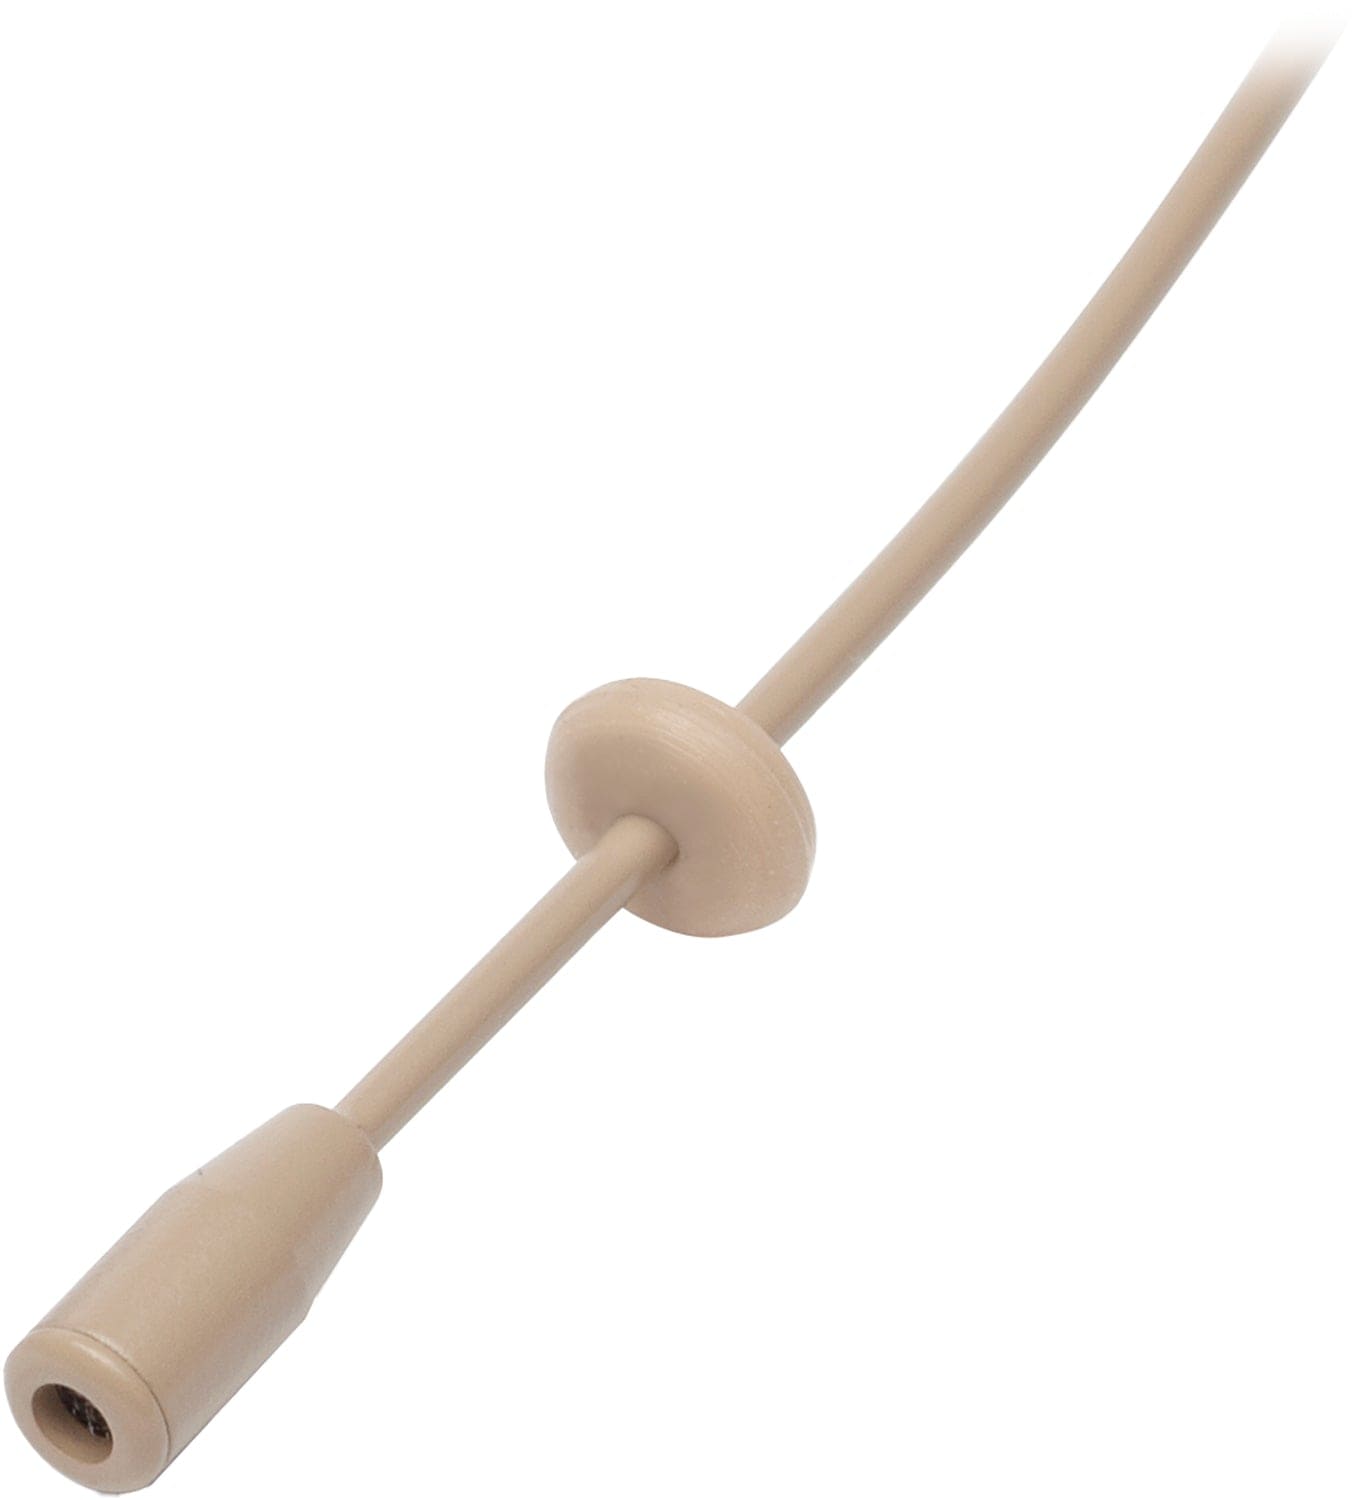 Samson SASE50TX Omnidirectional Earset Condenser Microphone 2.5mm Capsule IP65 Rating in Tan - PSSL ProSound and Stage Lighting